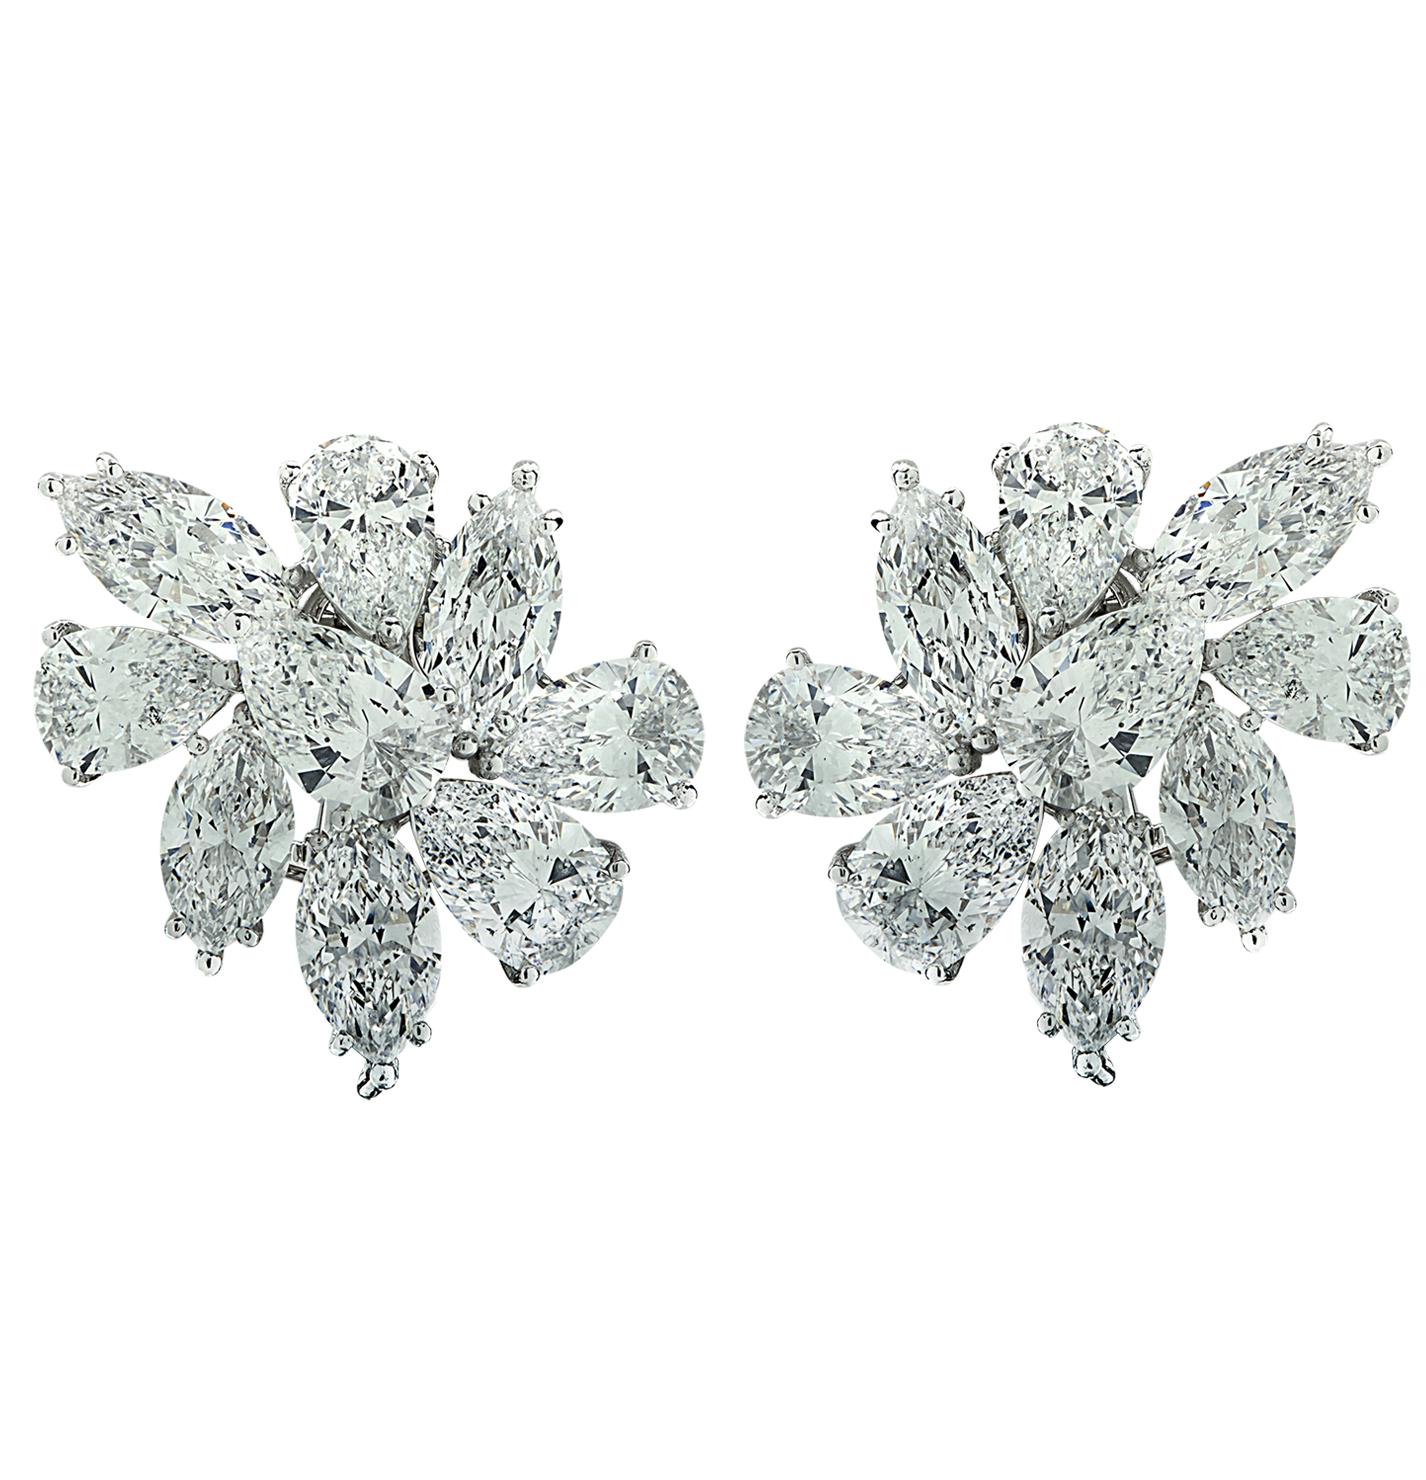 Sensational Vivid Diamonds Cluster Earrings crafted by hand in platinum, showcasing 18 mixed pear shape and marquise cut diamonds weighing approximately 25.02 carats total, D-E color SI clarity. Each diamond was carefully selected, perfectly matched